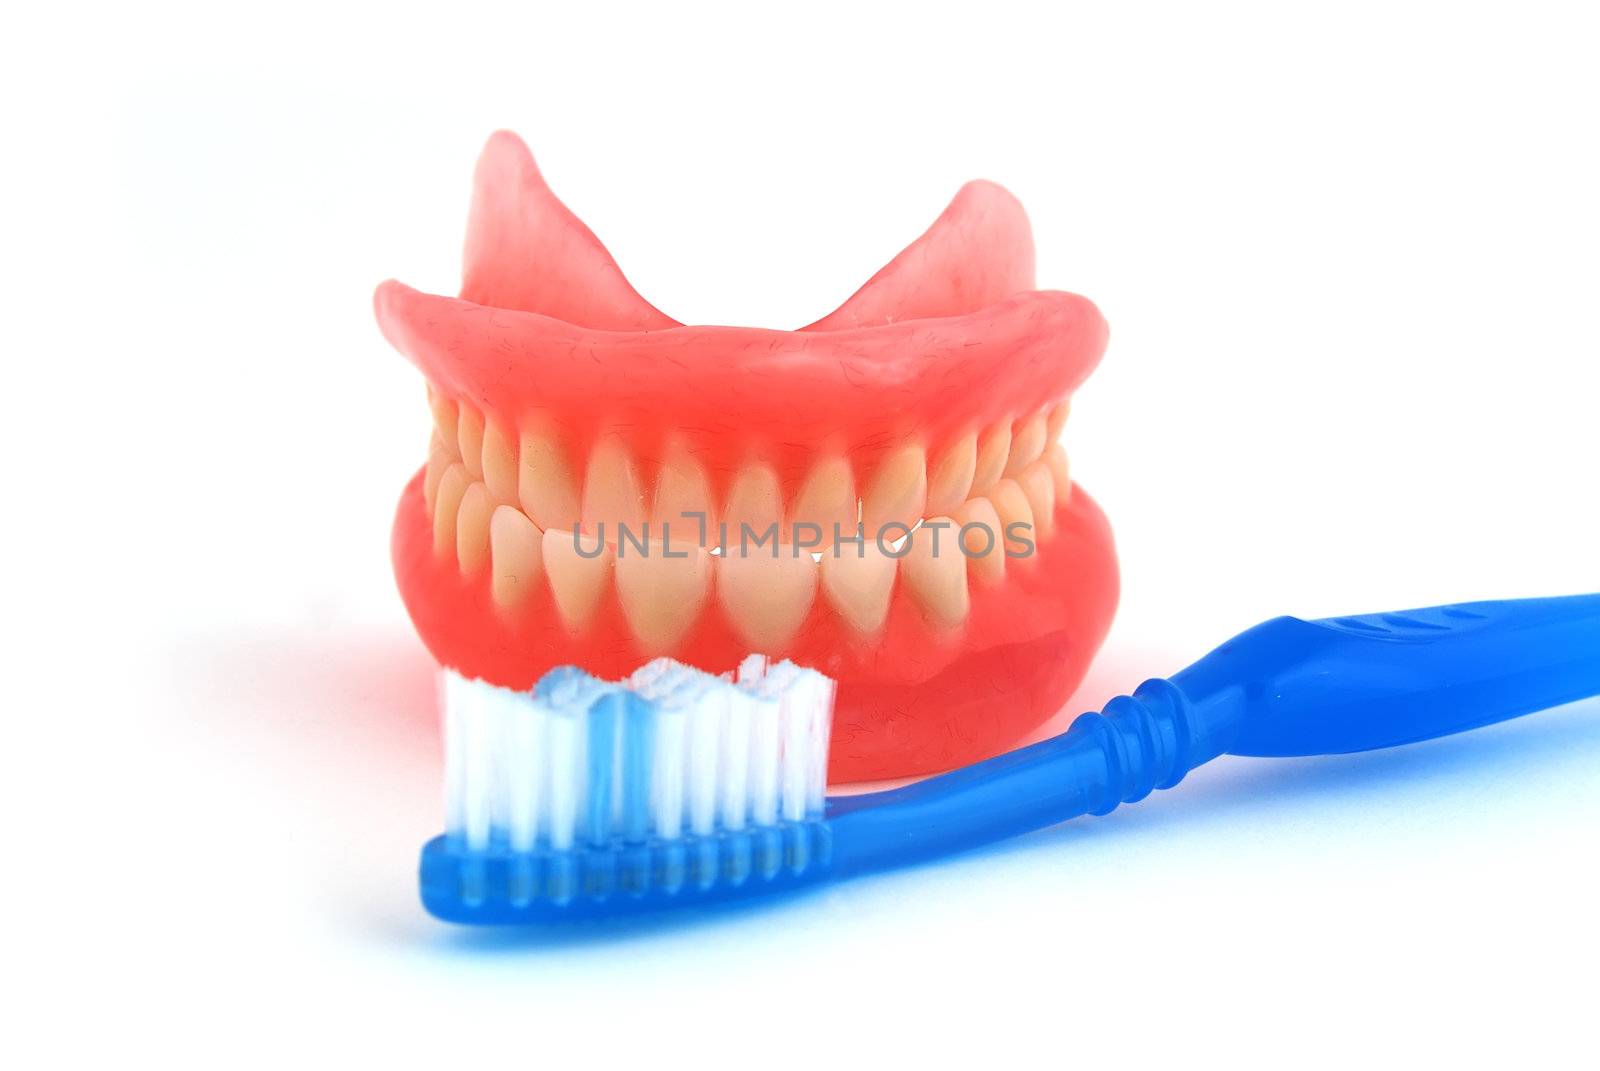 dentures and toothbrush by vetkit